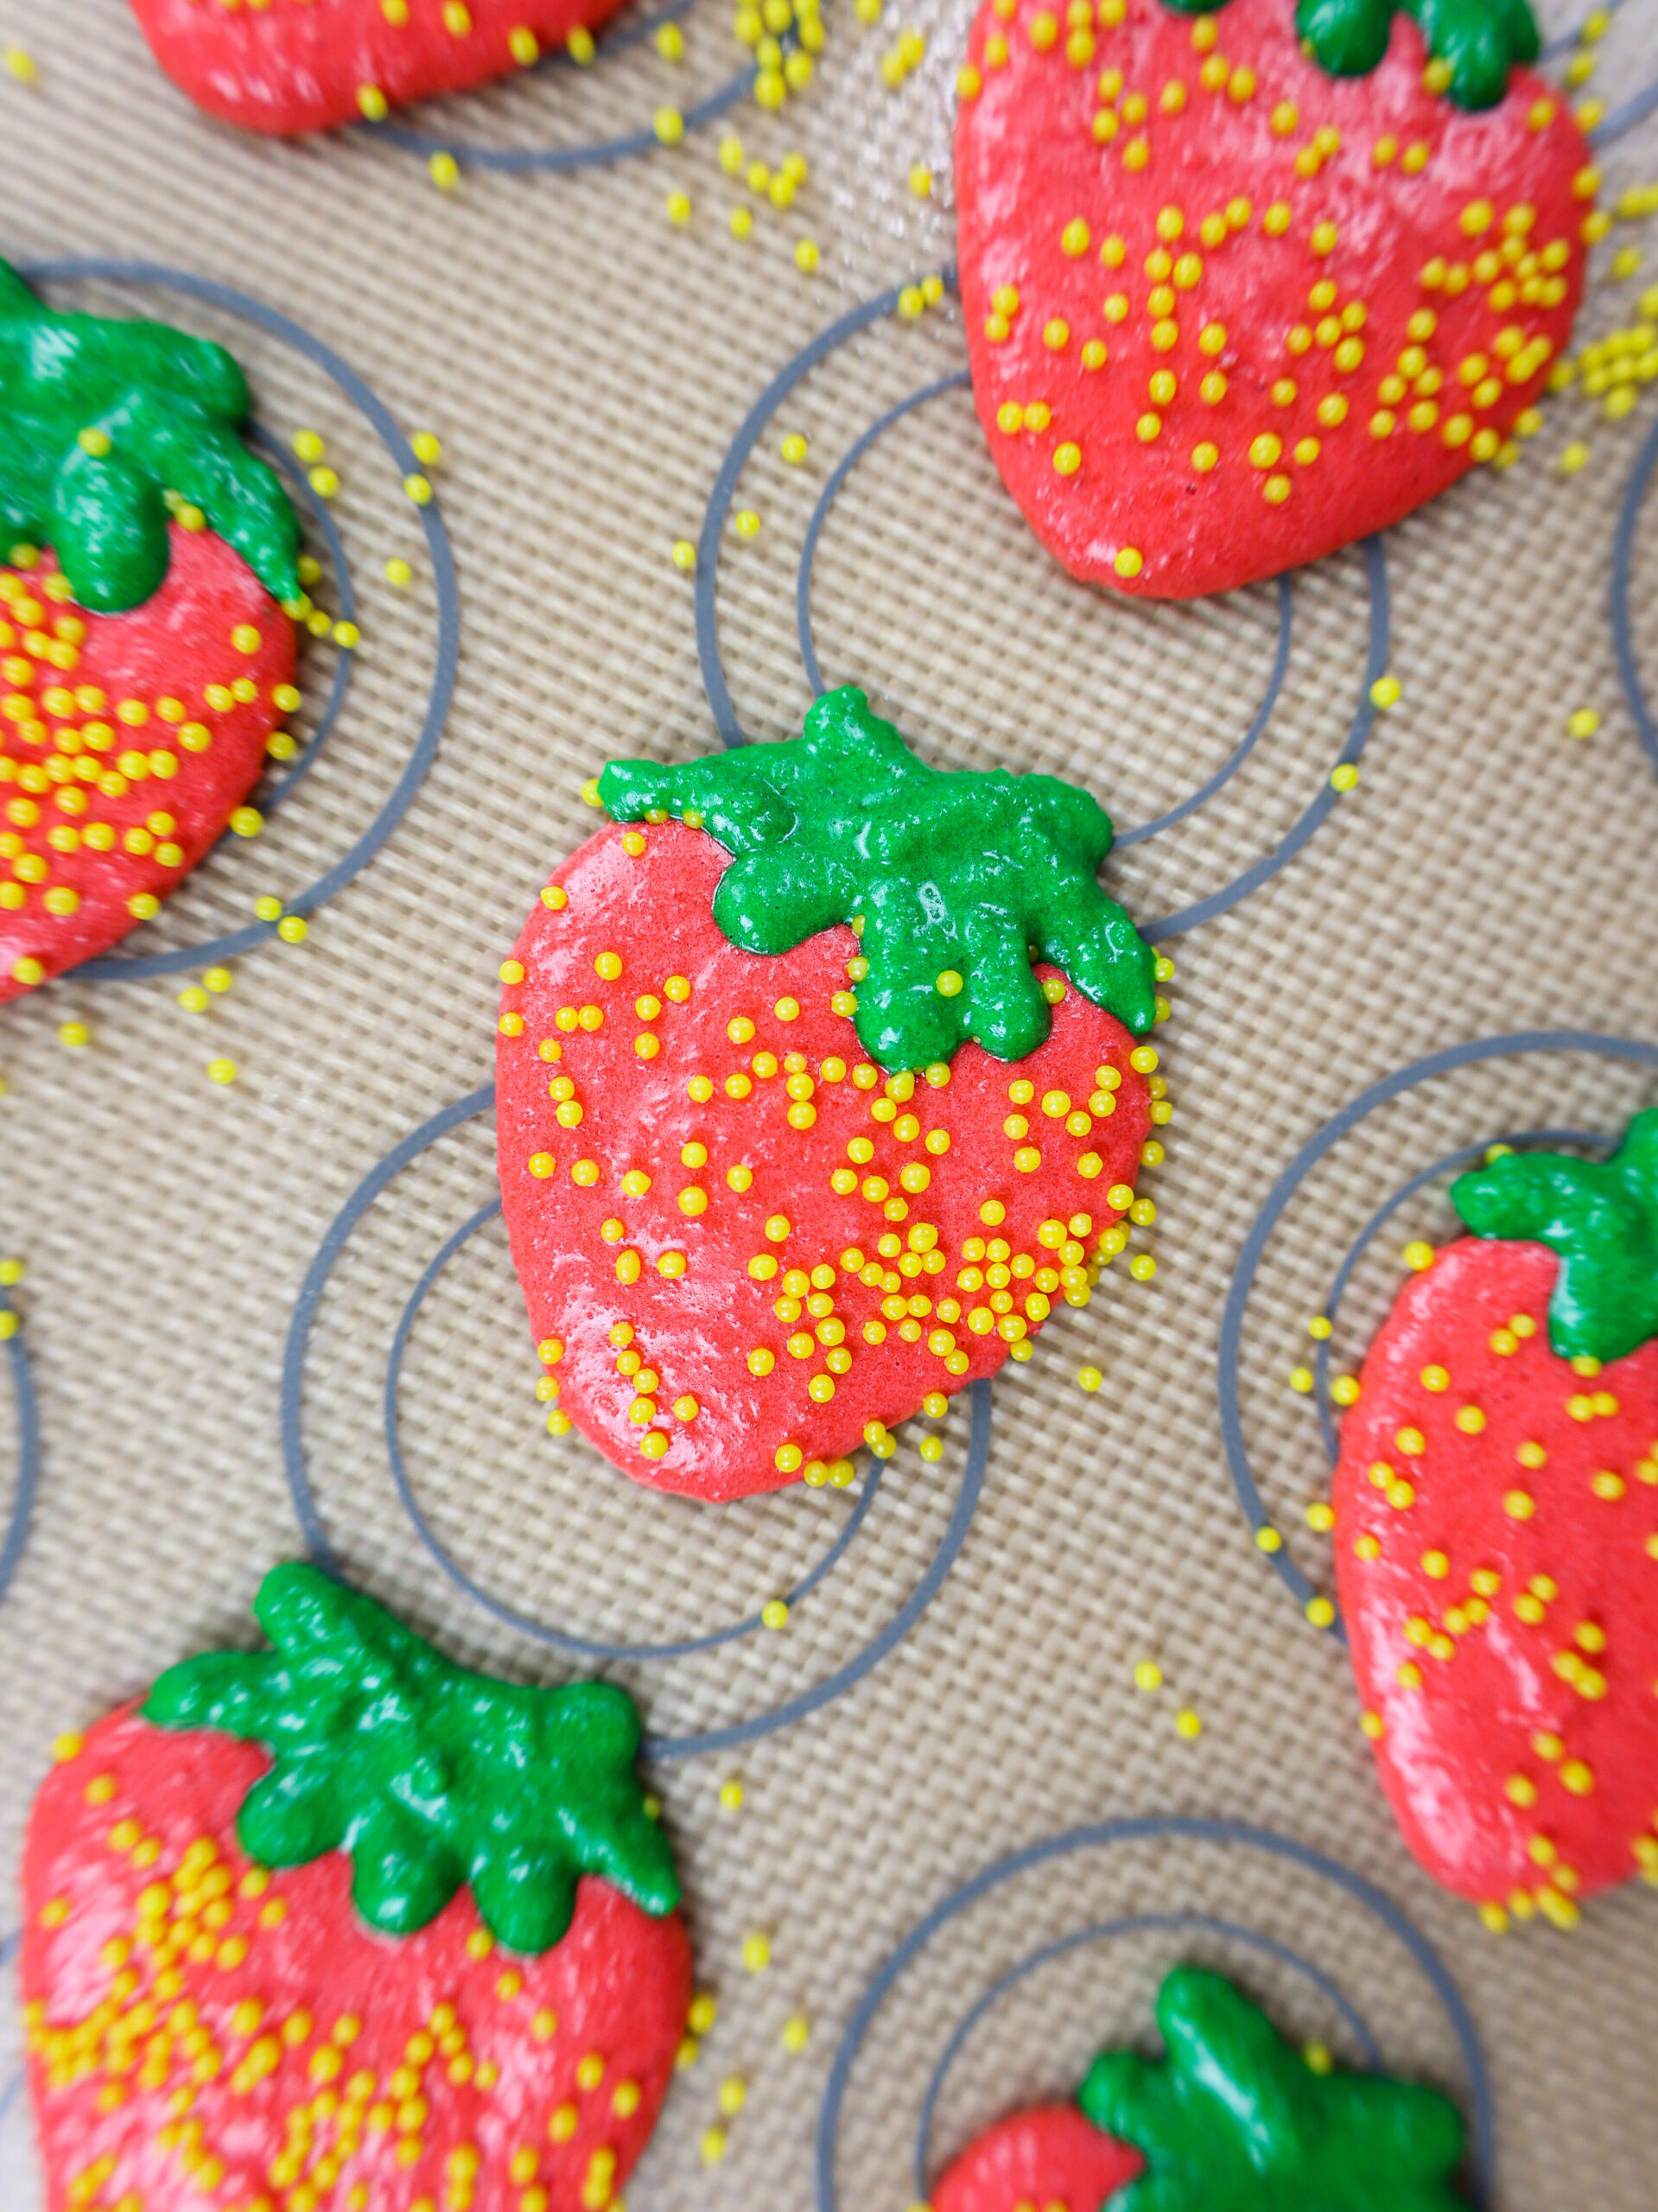 image of strawberry shaped macaron shells resting before being baked